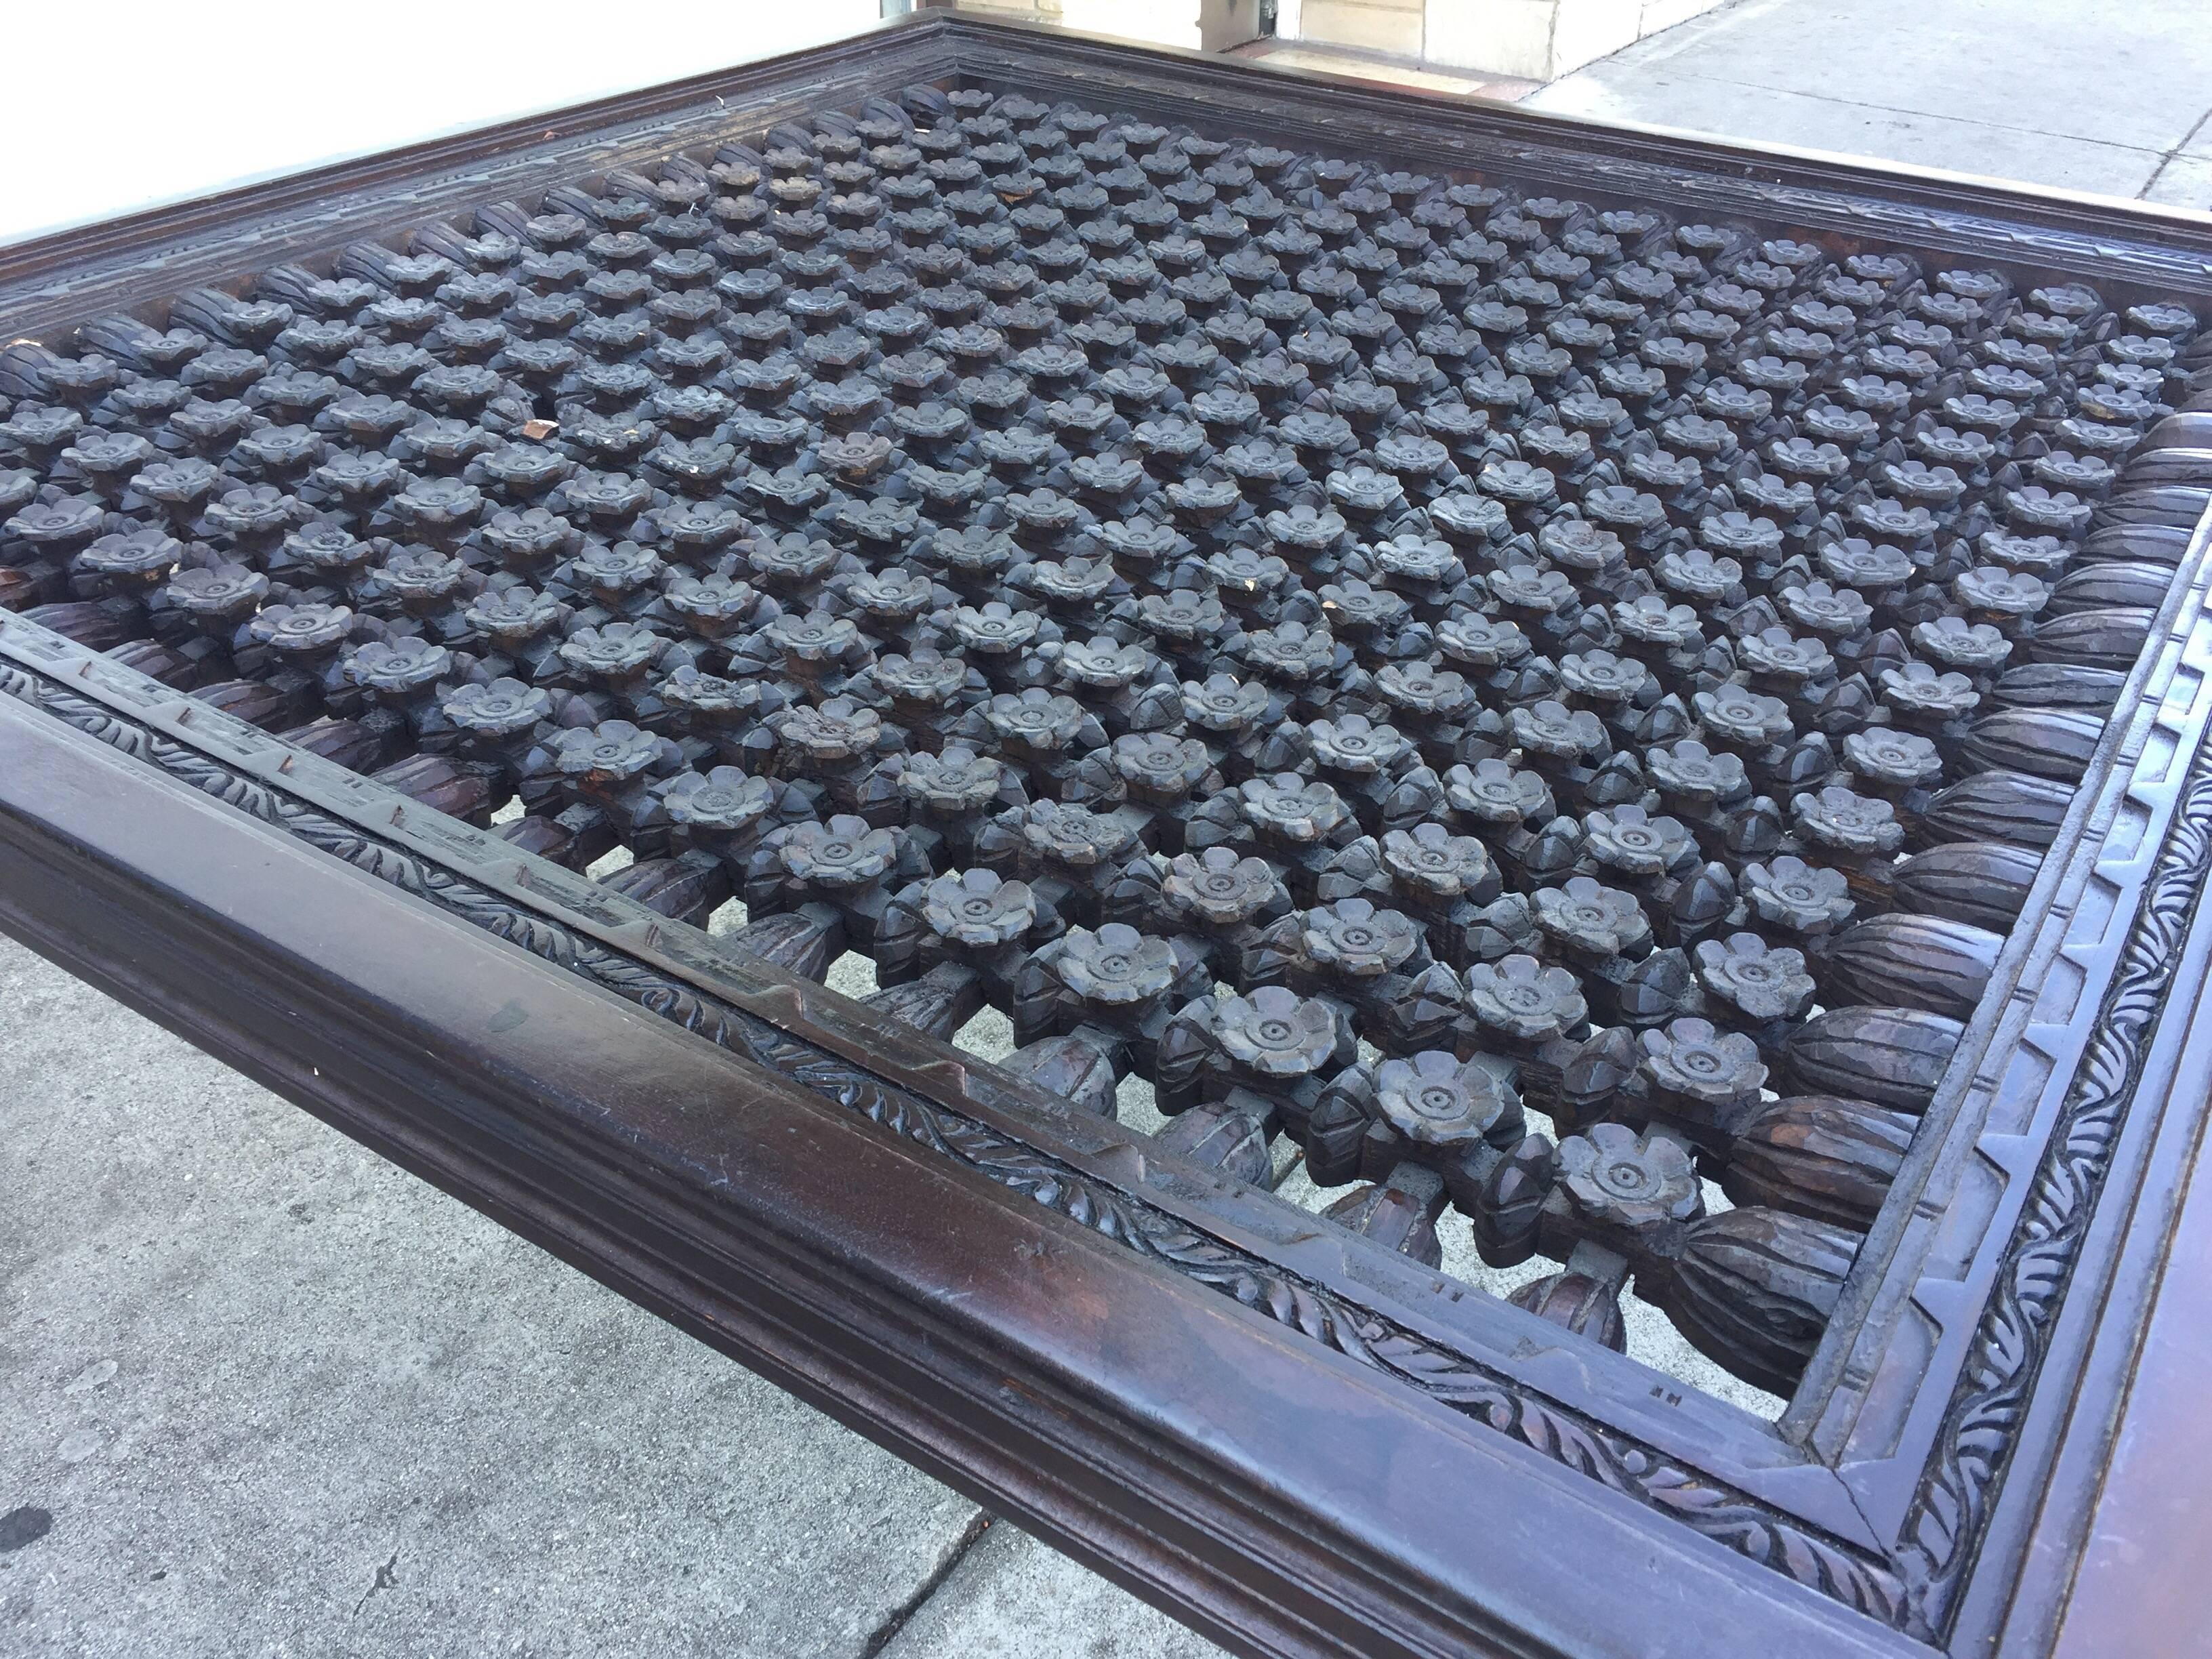 Intricately hand-carved Anglo-Indian style square dining table.
This custom wooden table is decorated with hundred of small hand-carved flowers.
Made using a window screen, or architectural panel.
Comfortably seats eight. You just need to add a